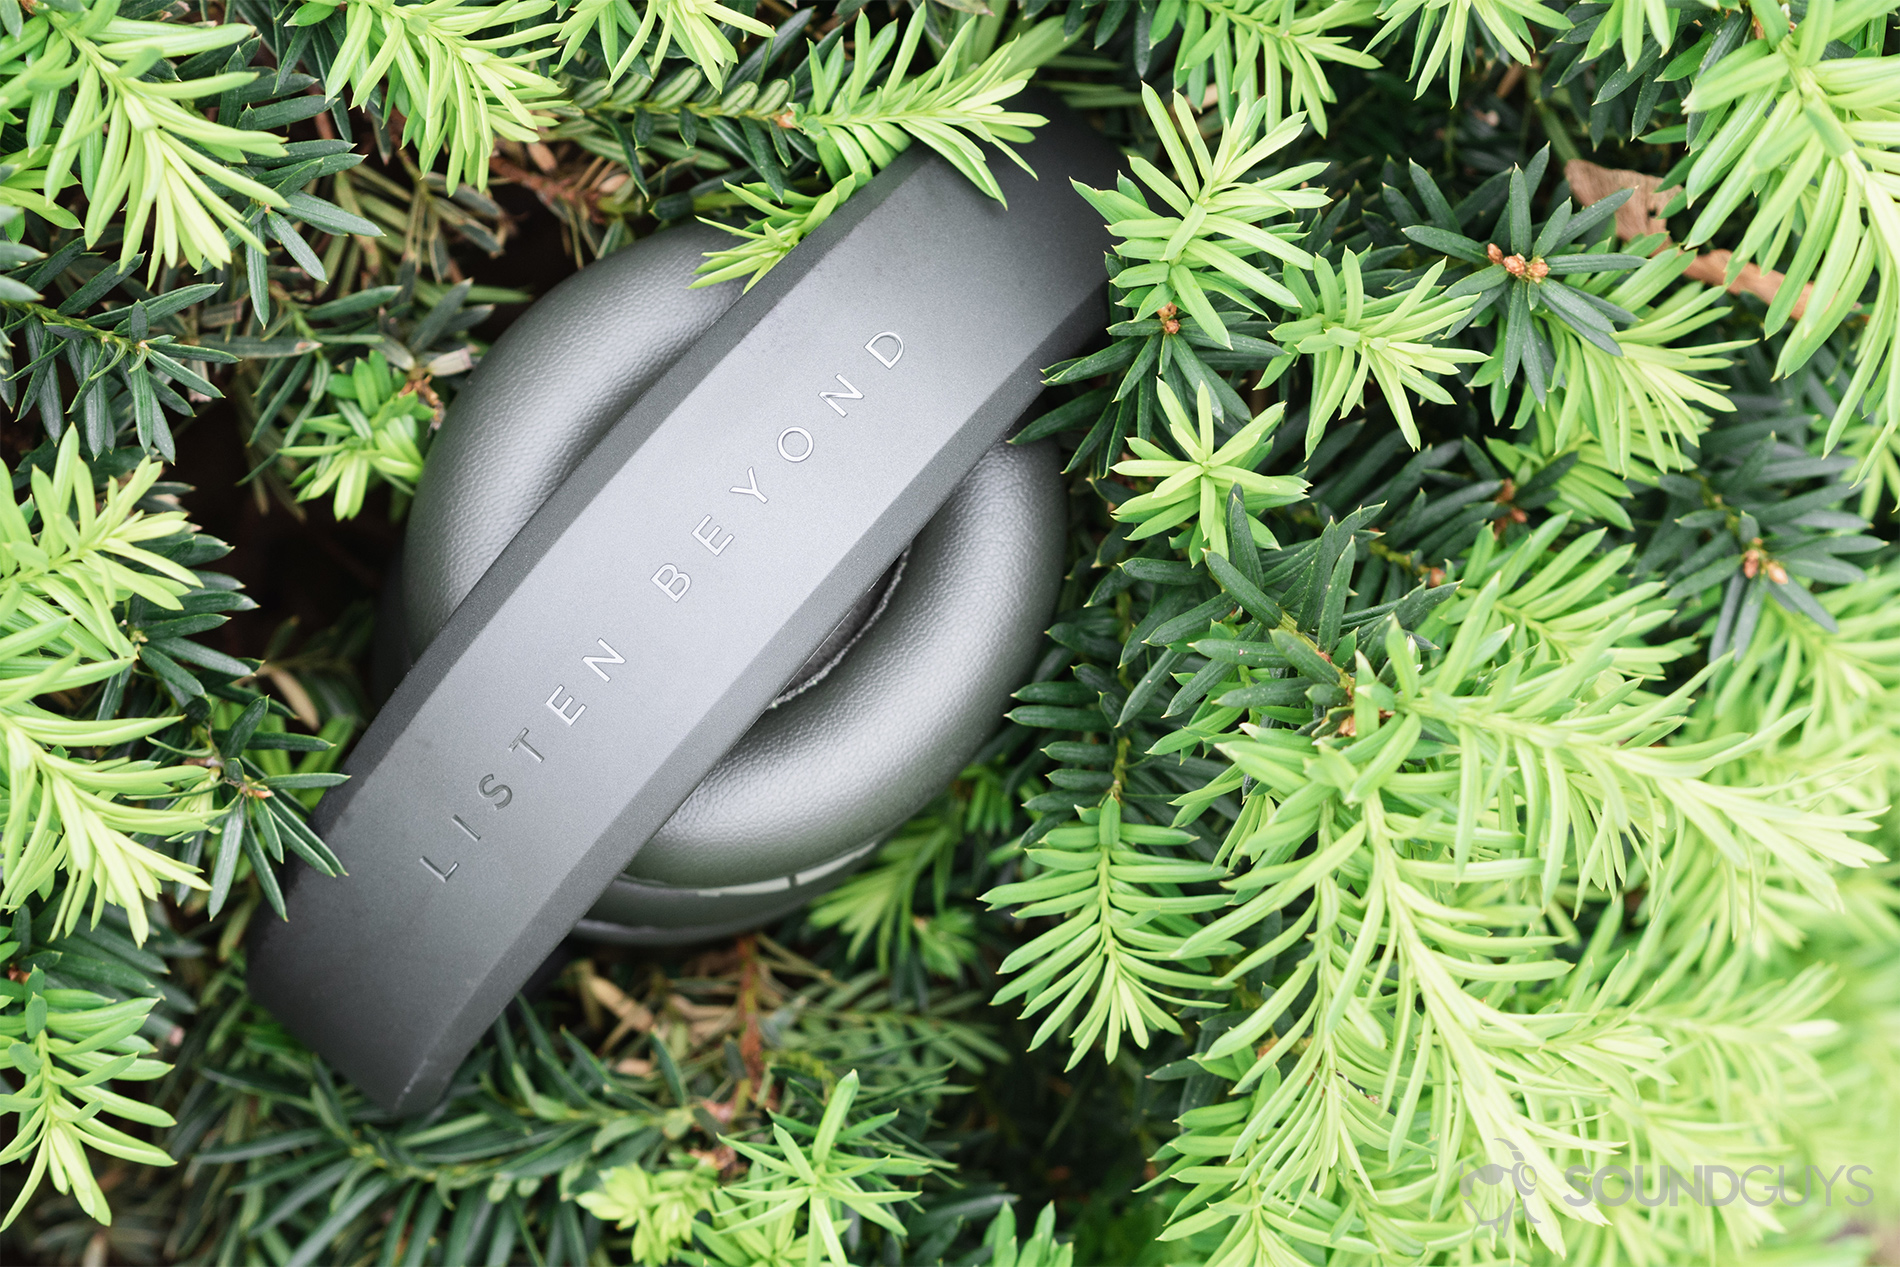 Focal Listen Wireless review: The headphones (olive) folded up and resting in a bright green shrub.